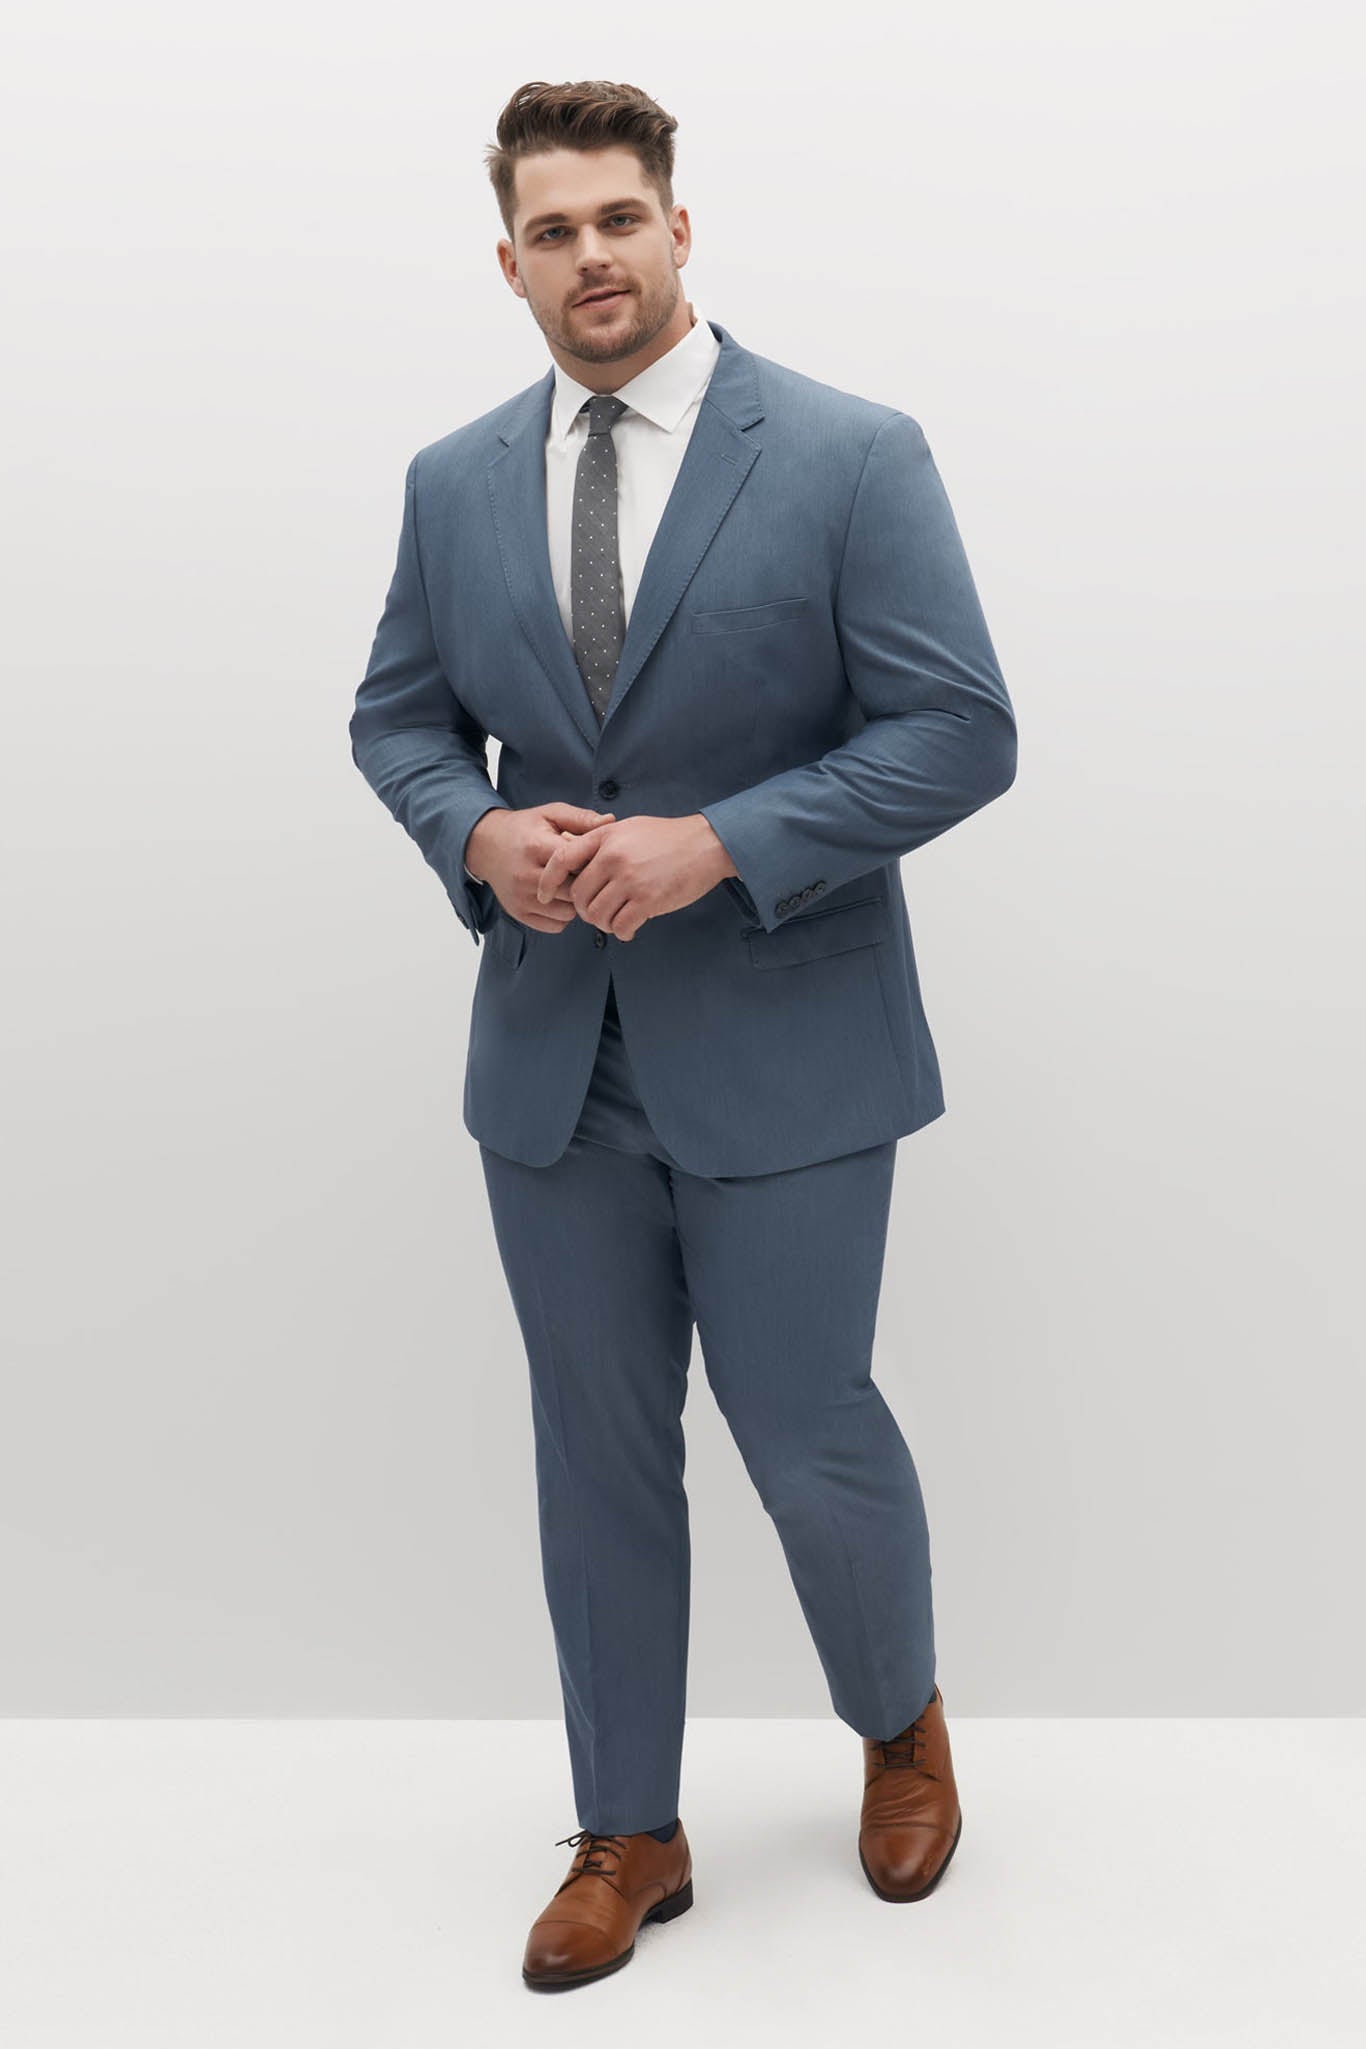 Royal Blue Blue Tuxedo Groomsmen Suit For Weddings 2019 Collection 255m  From Mark776, $94.17 | DHgate.Com